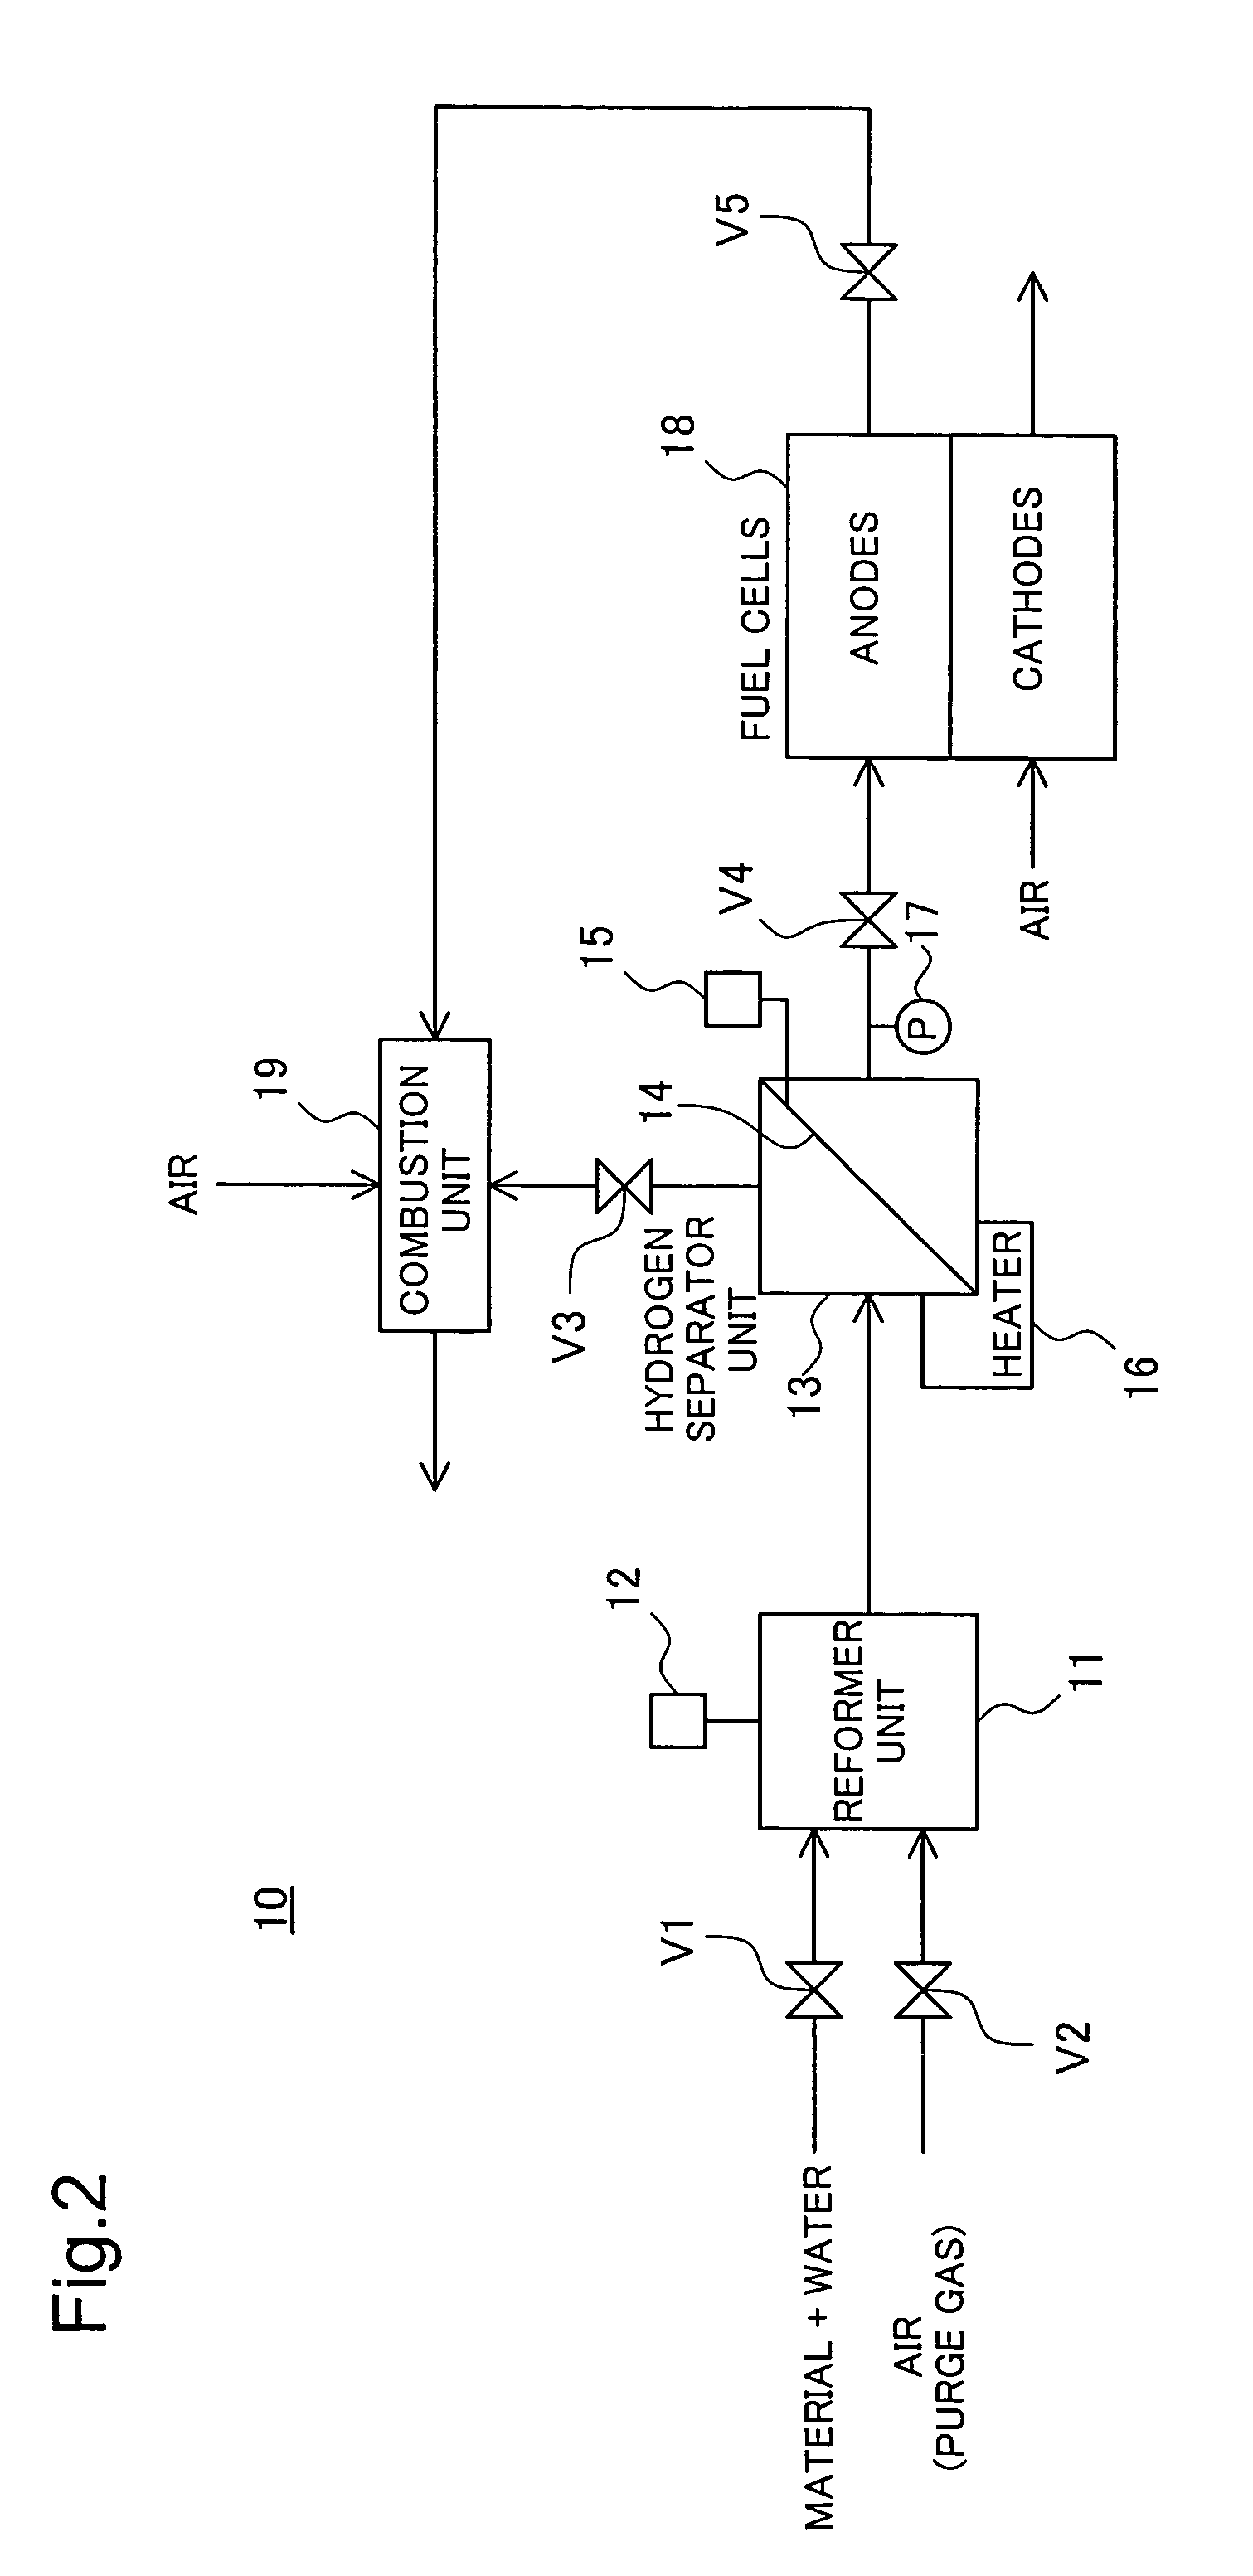 Drive control of power system including fuel cells